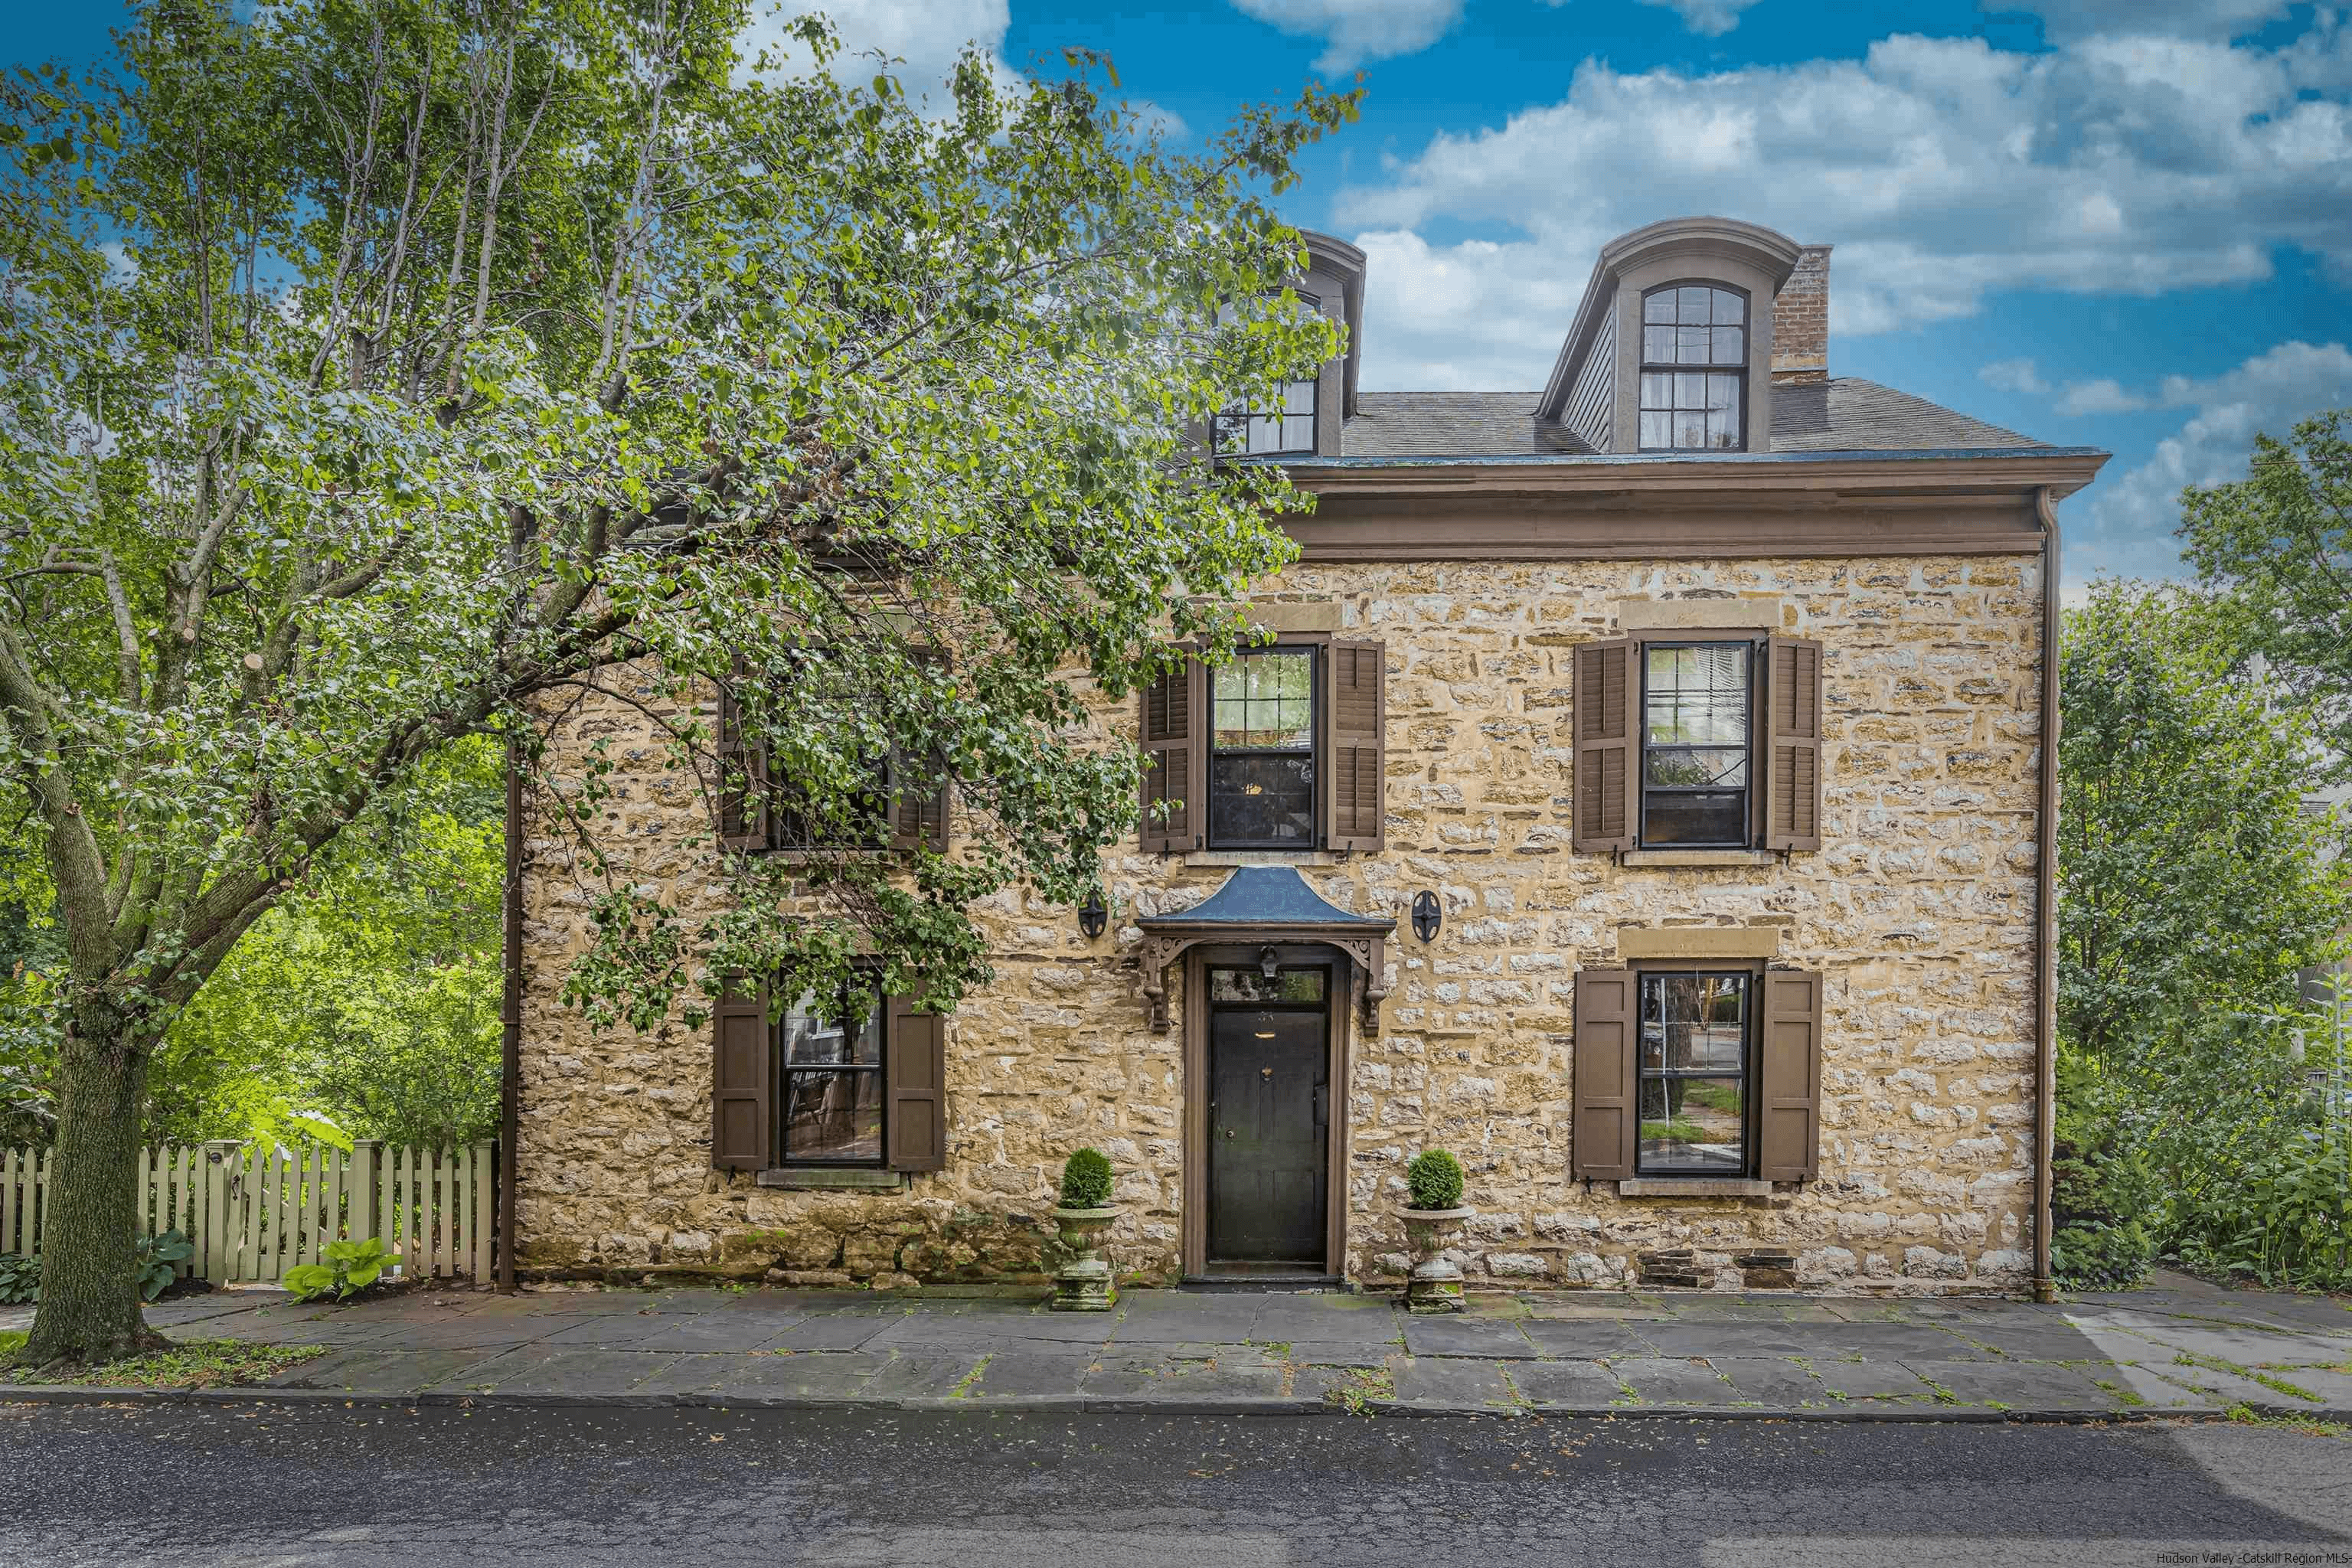 stone exterior of the three bay wide house